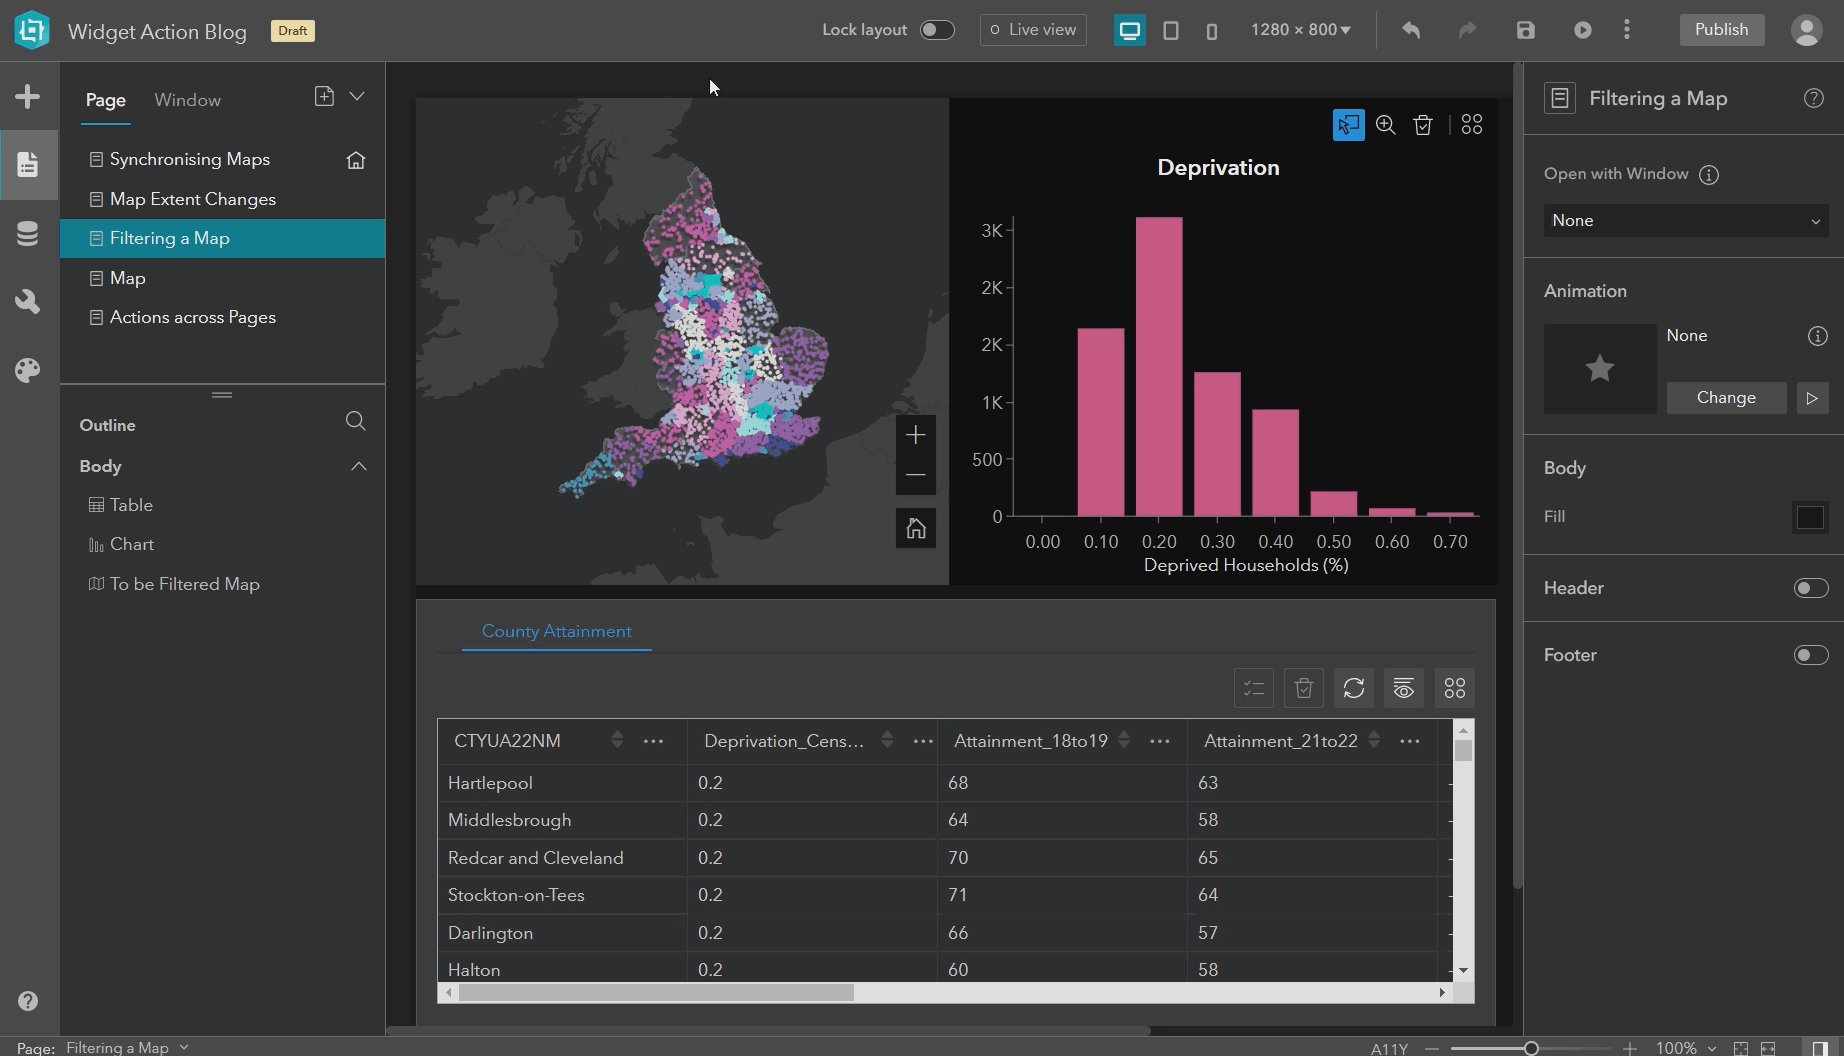 User setting up the trigger so that selecting a feature of the bar chart gets the map to filter to that feature too.